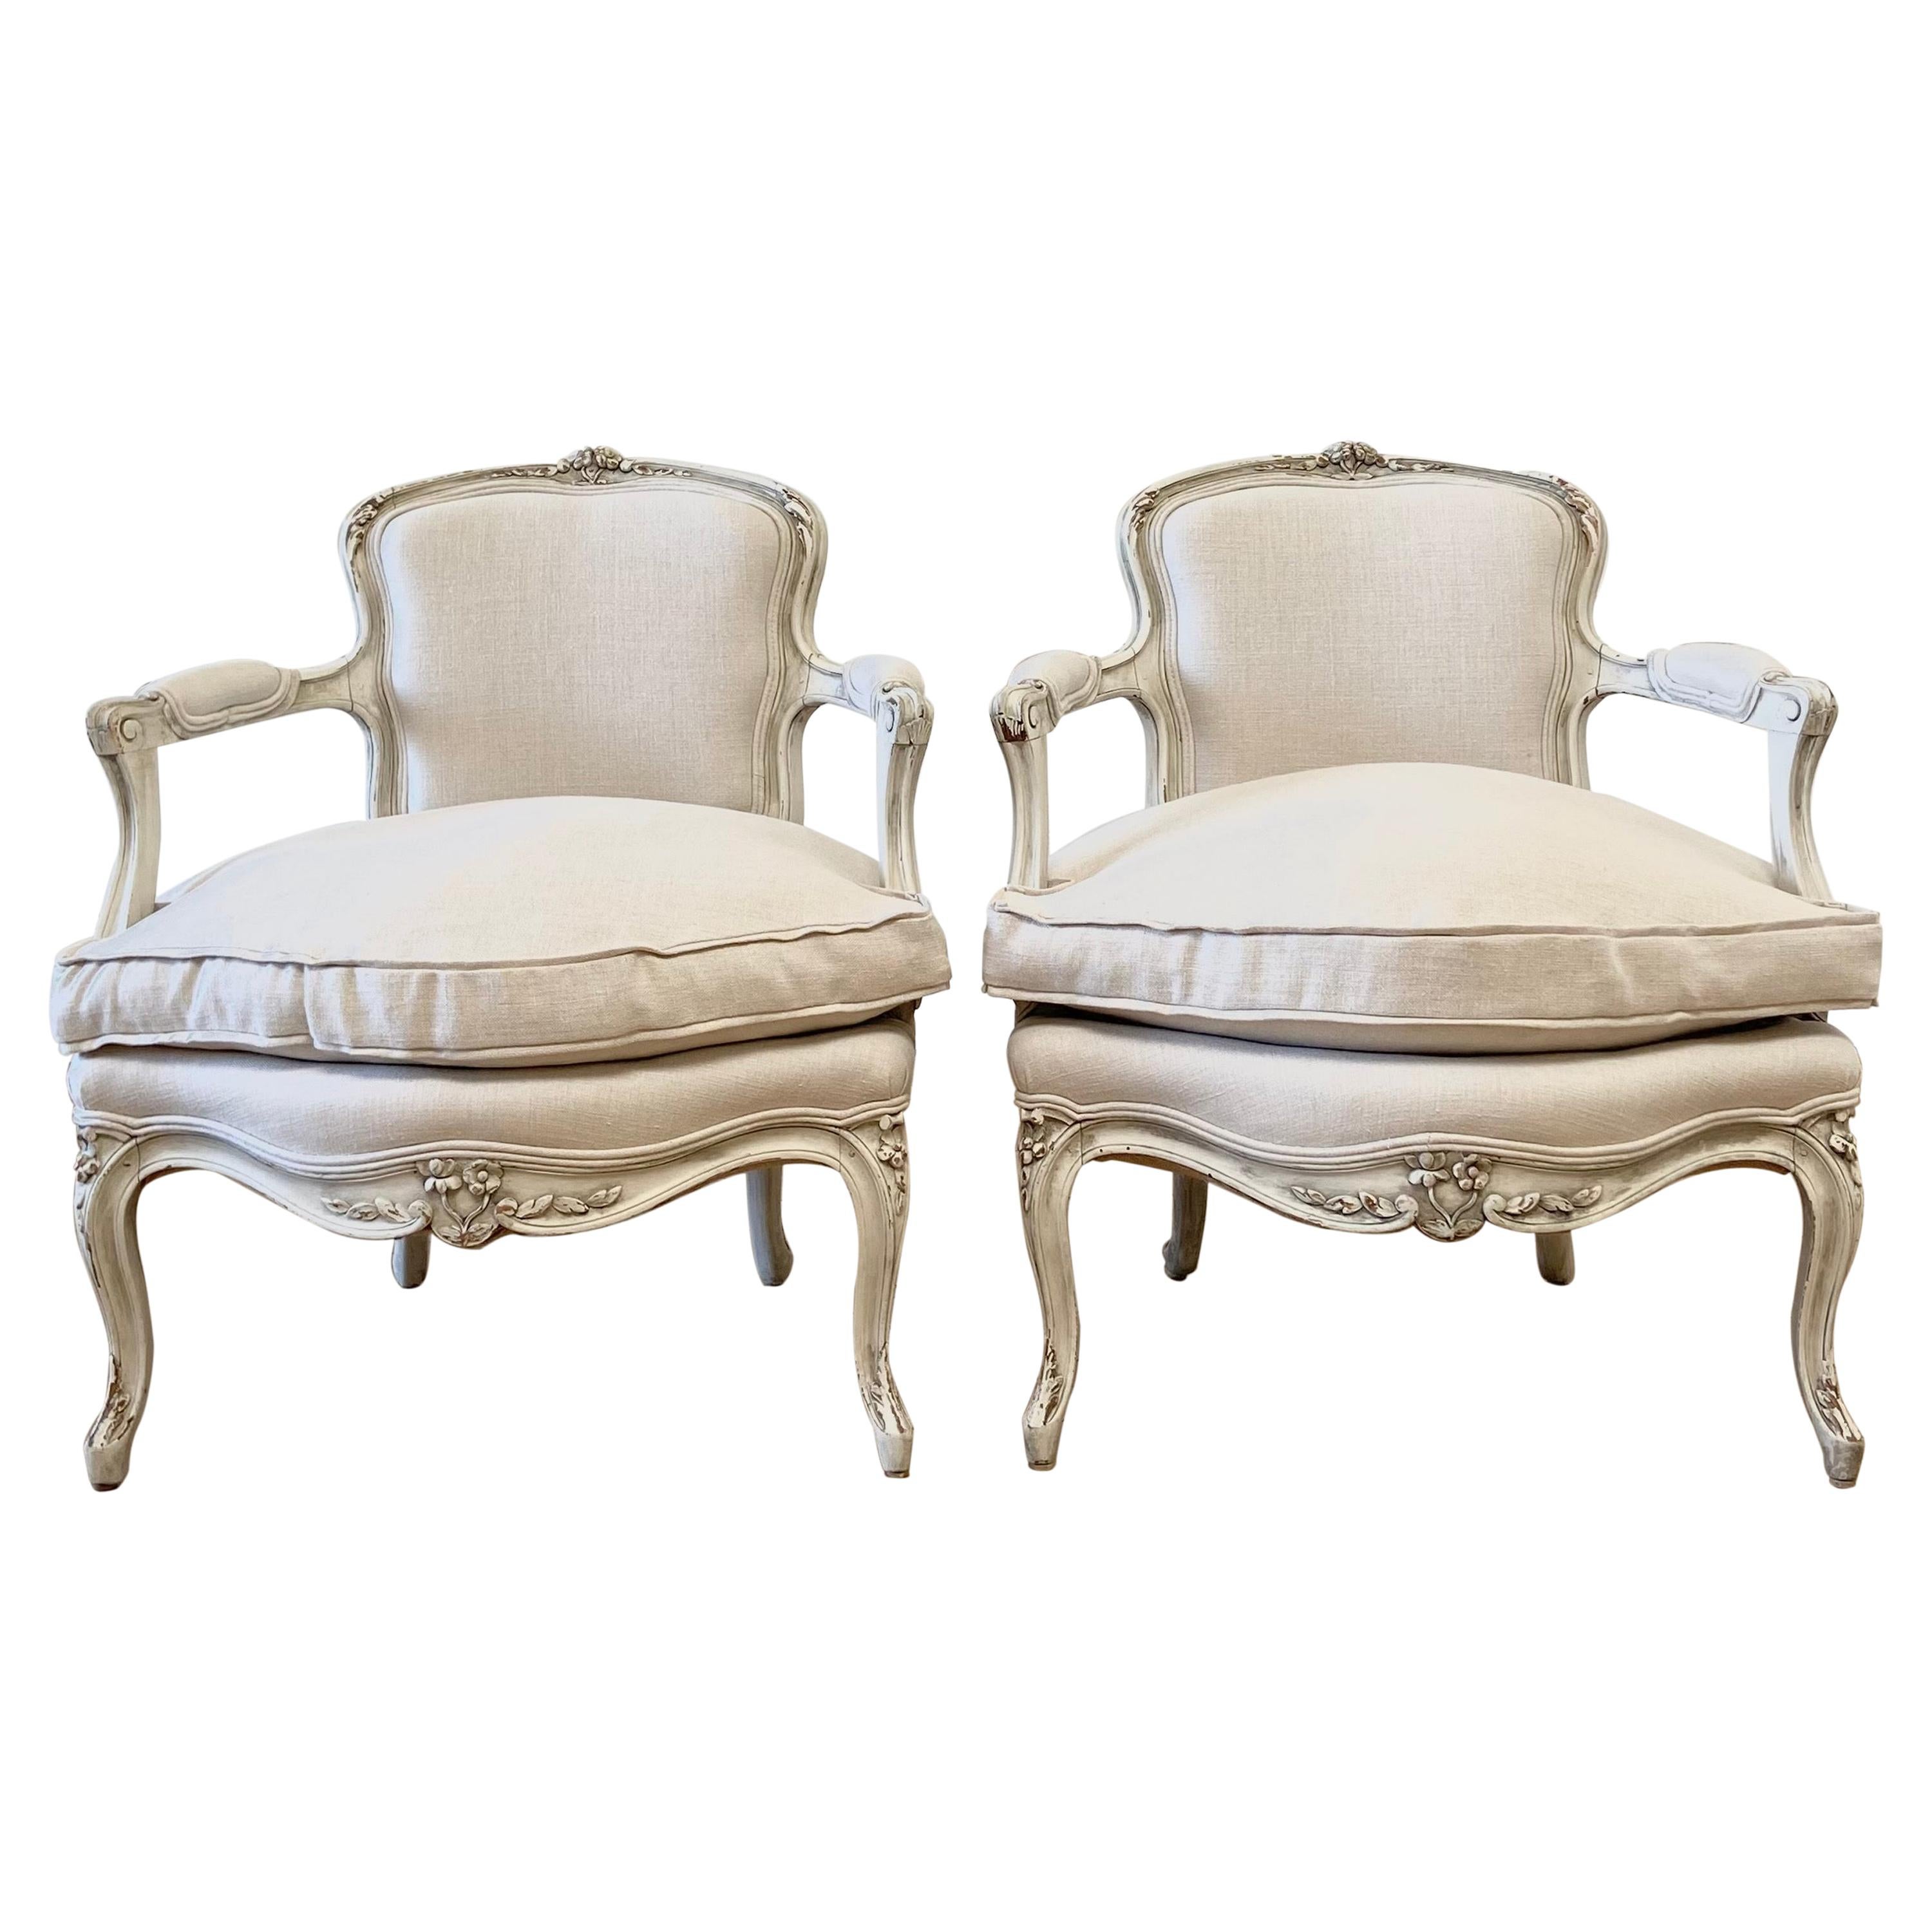 Antique Louis XV Style Open Arm Chairs in Linen